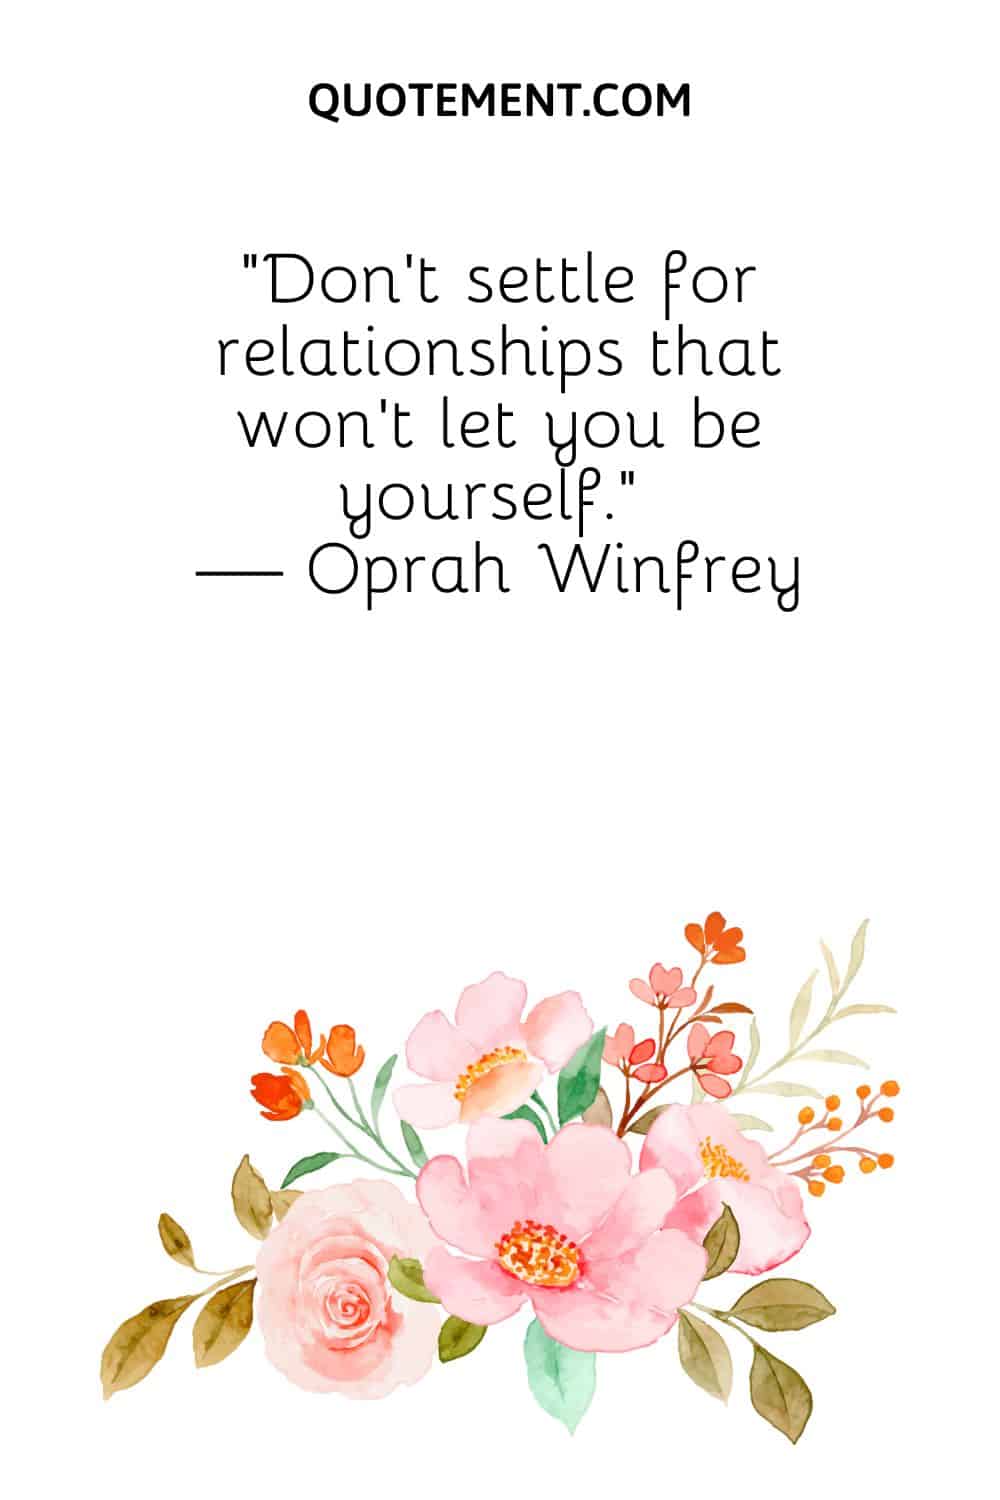 Don’t settle for relationships that won’t let you be yourself